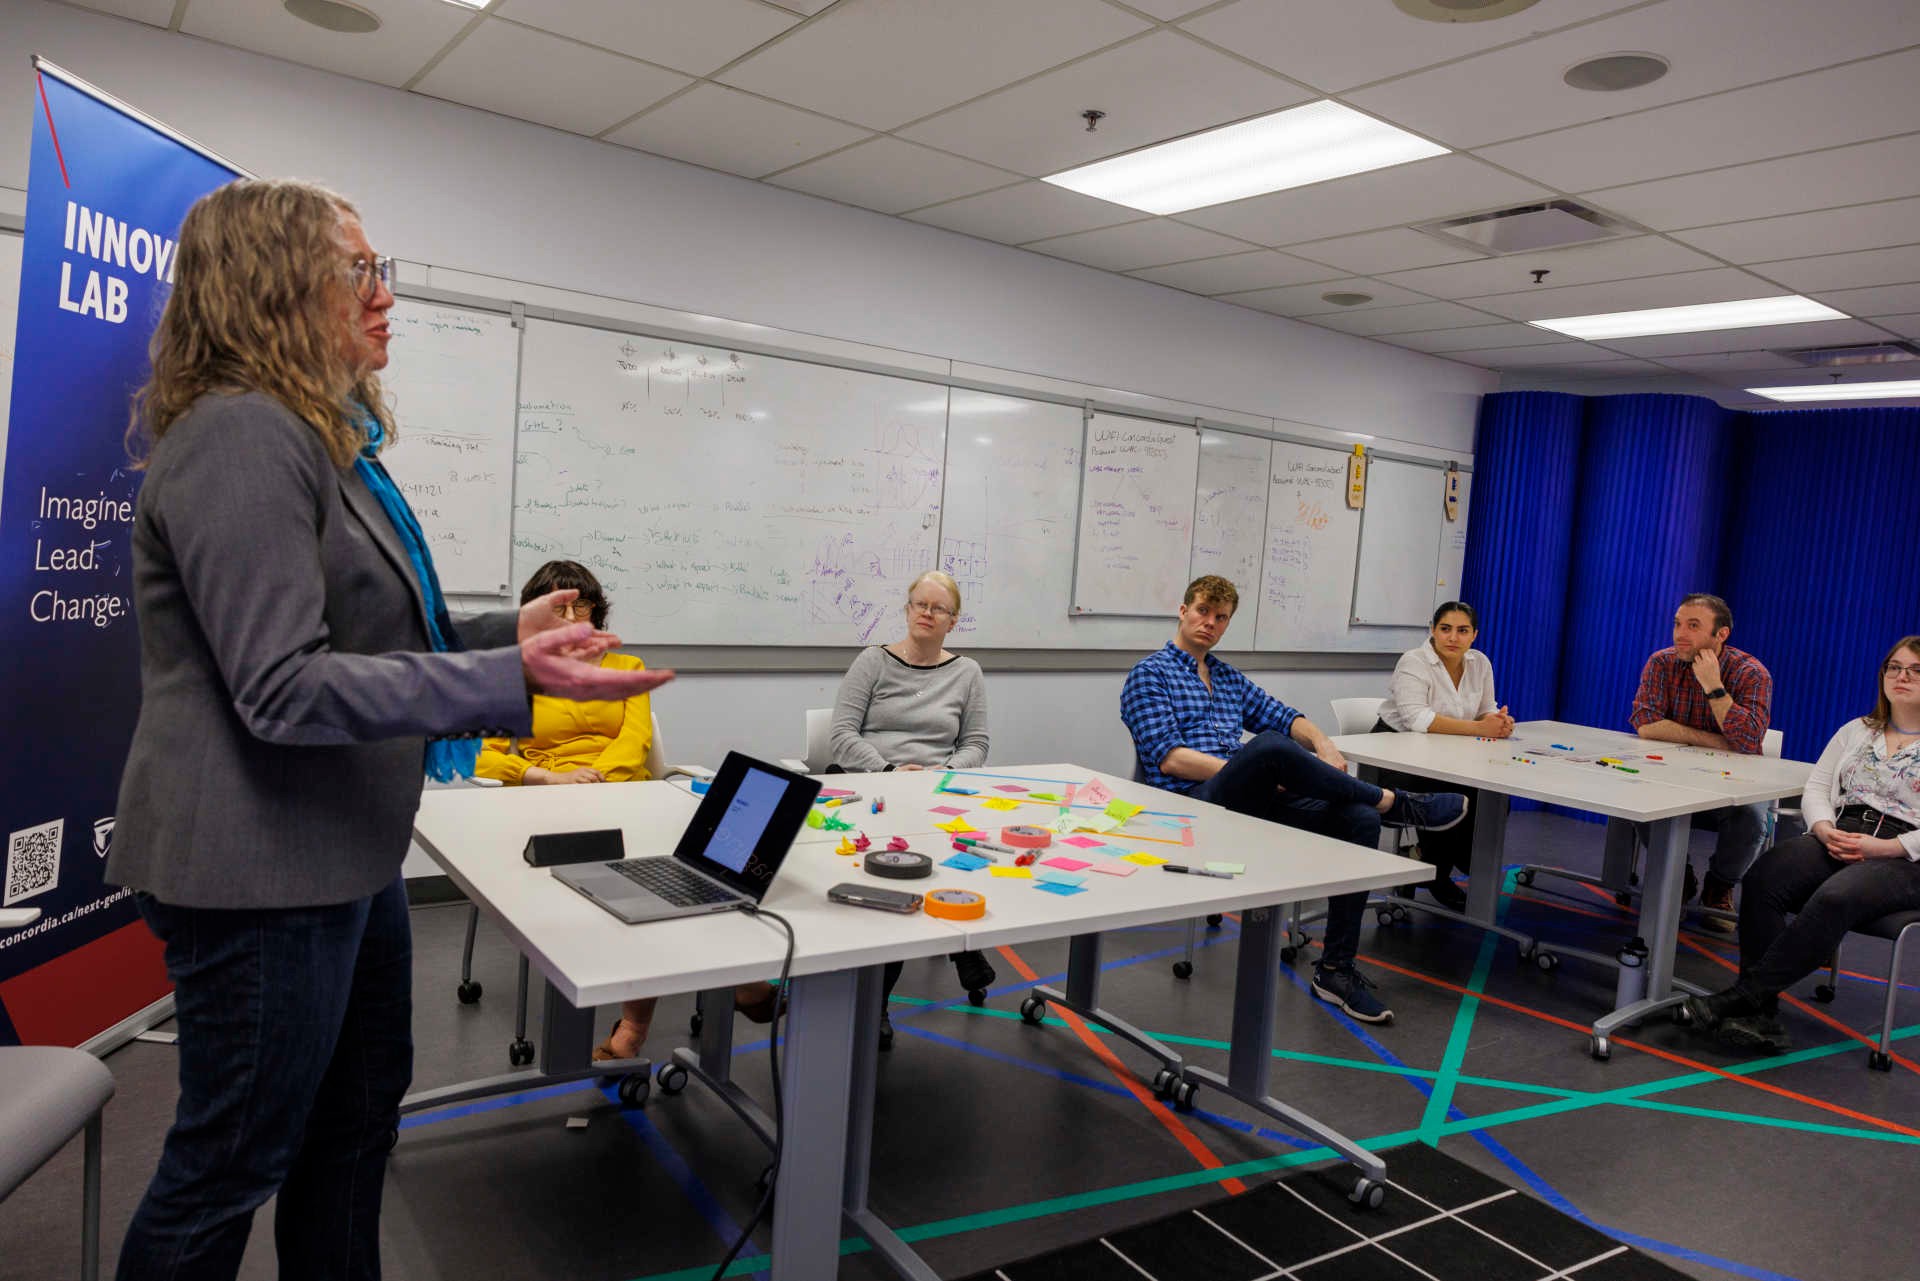 Professor Ann Louise Davidson addresses a group of students in the innovation lab